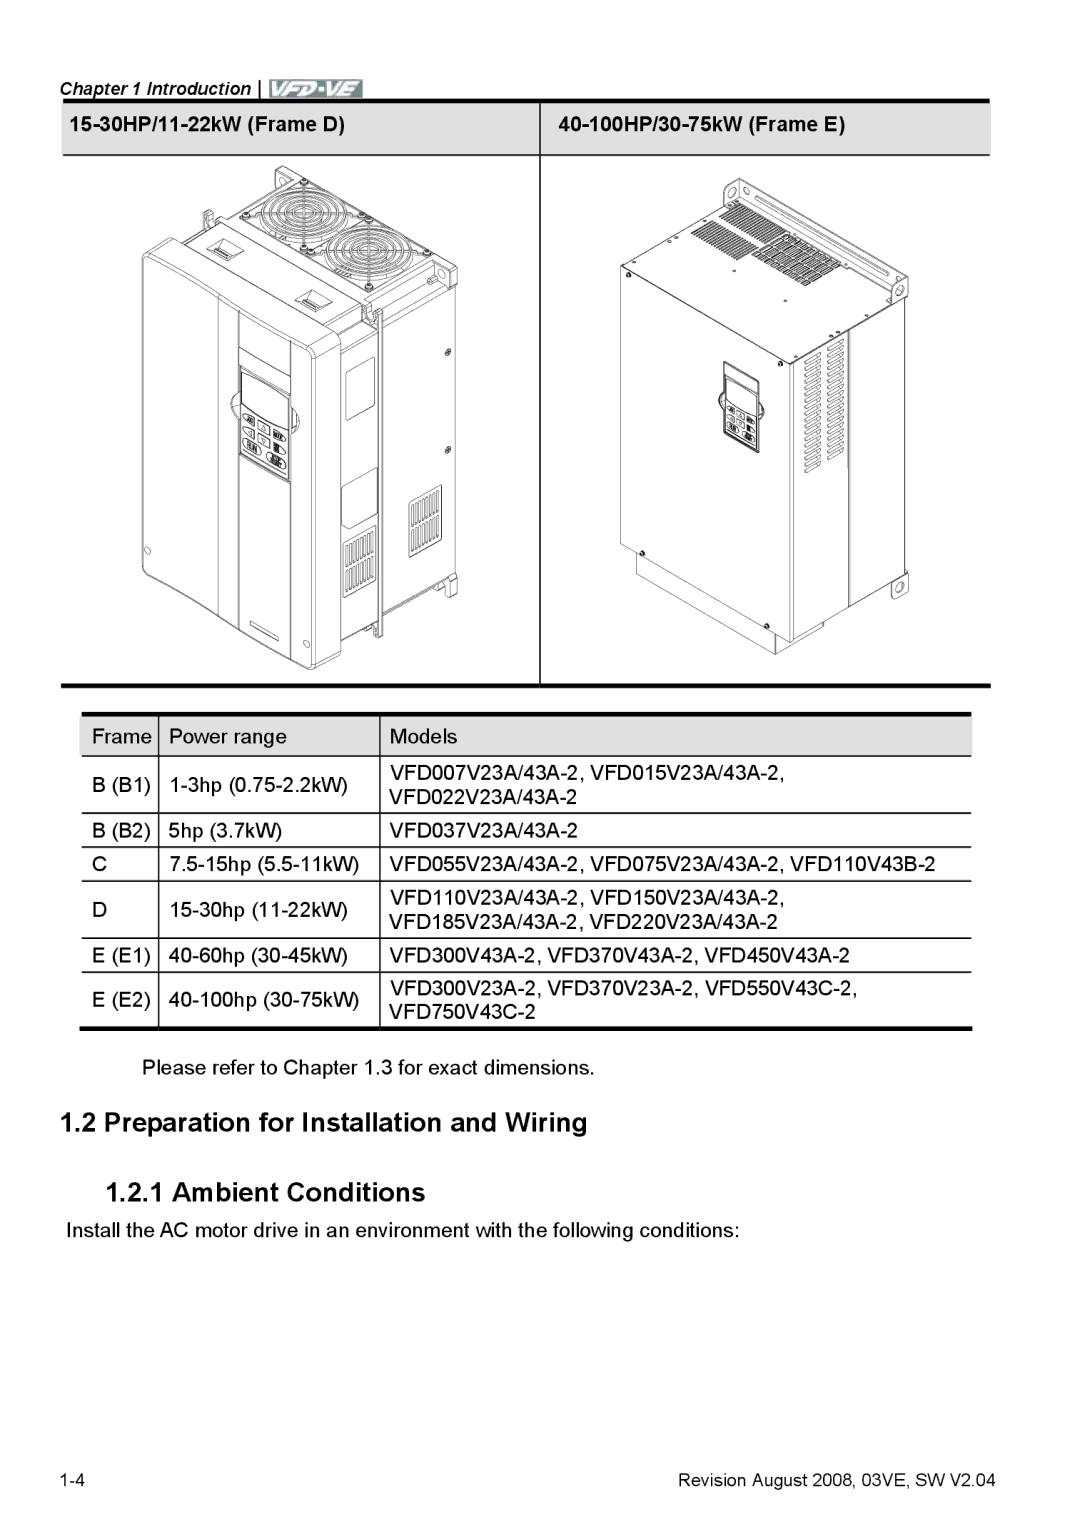 Delta Electronics VFD-VE Series manual Preparation for Installation and Wiring Ambient Conditions 